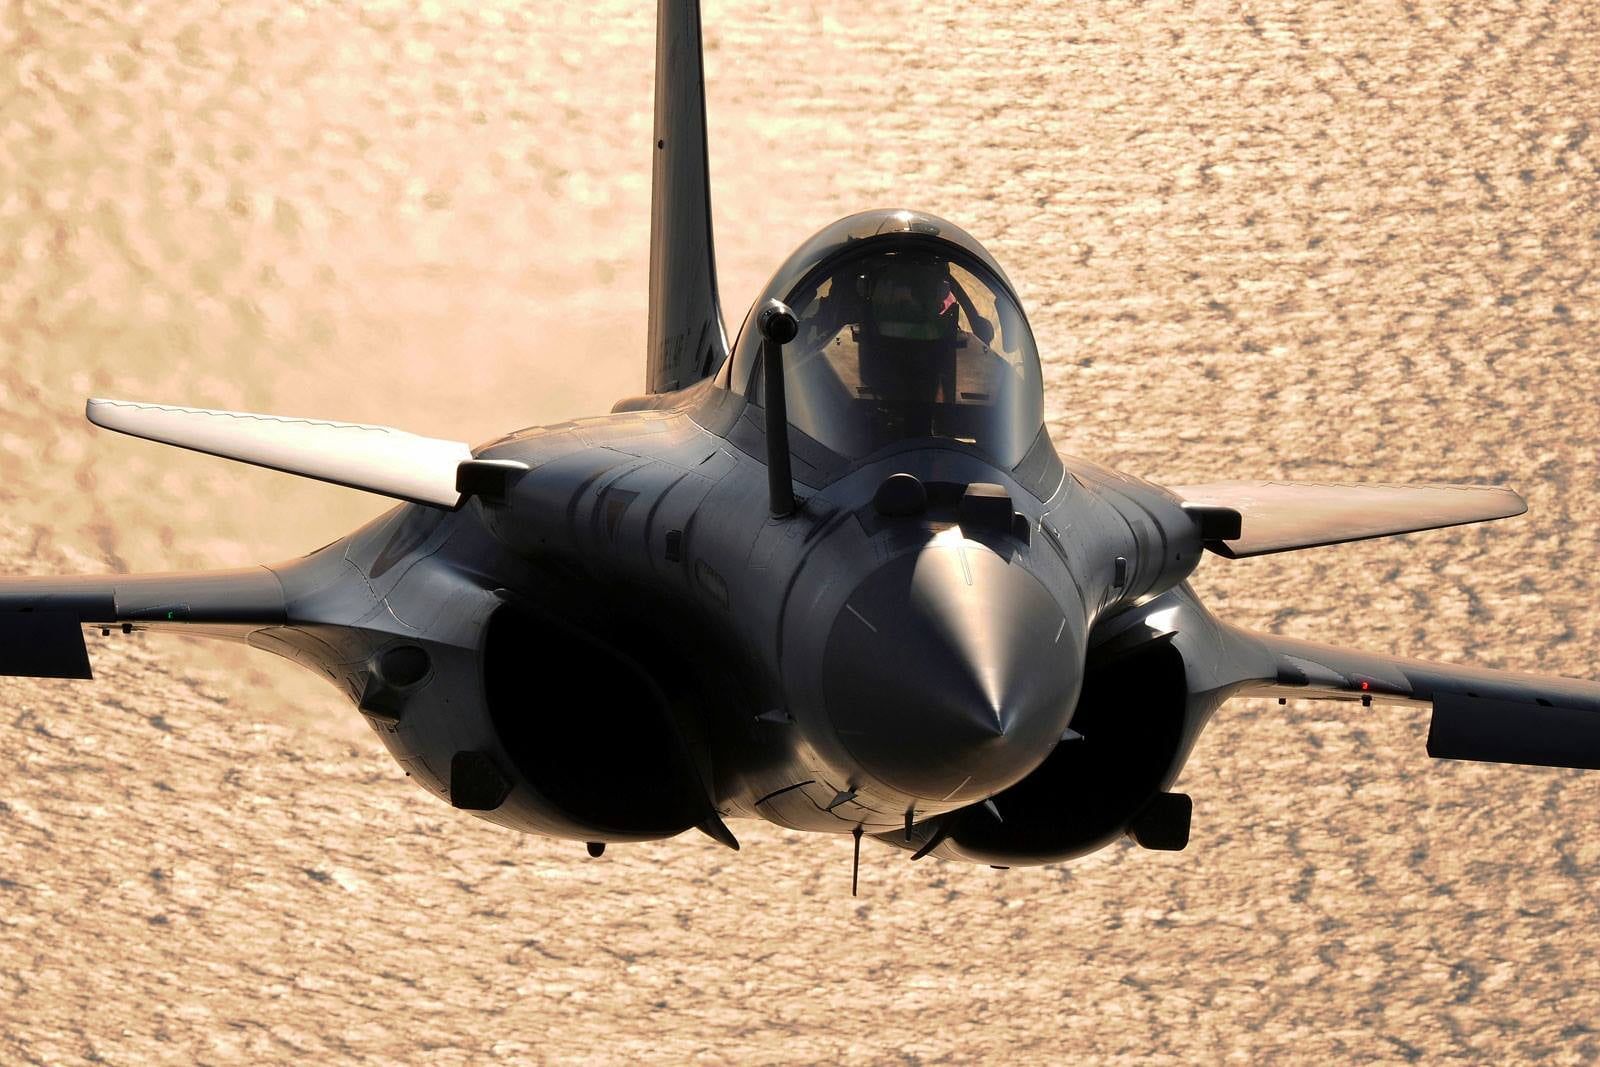 Black and gray jet, Dassault Rafale, French Air Force, jet fighter